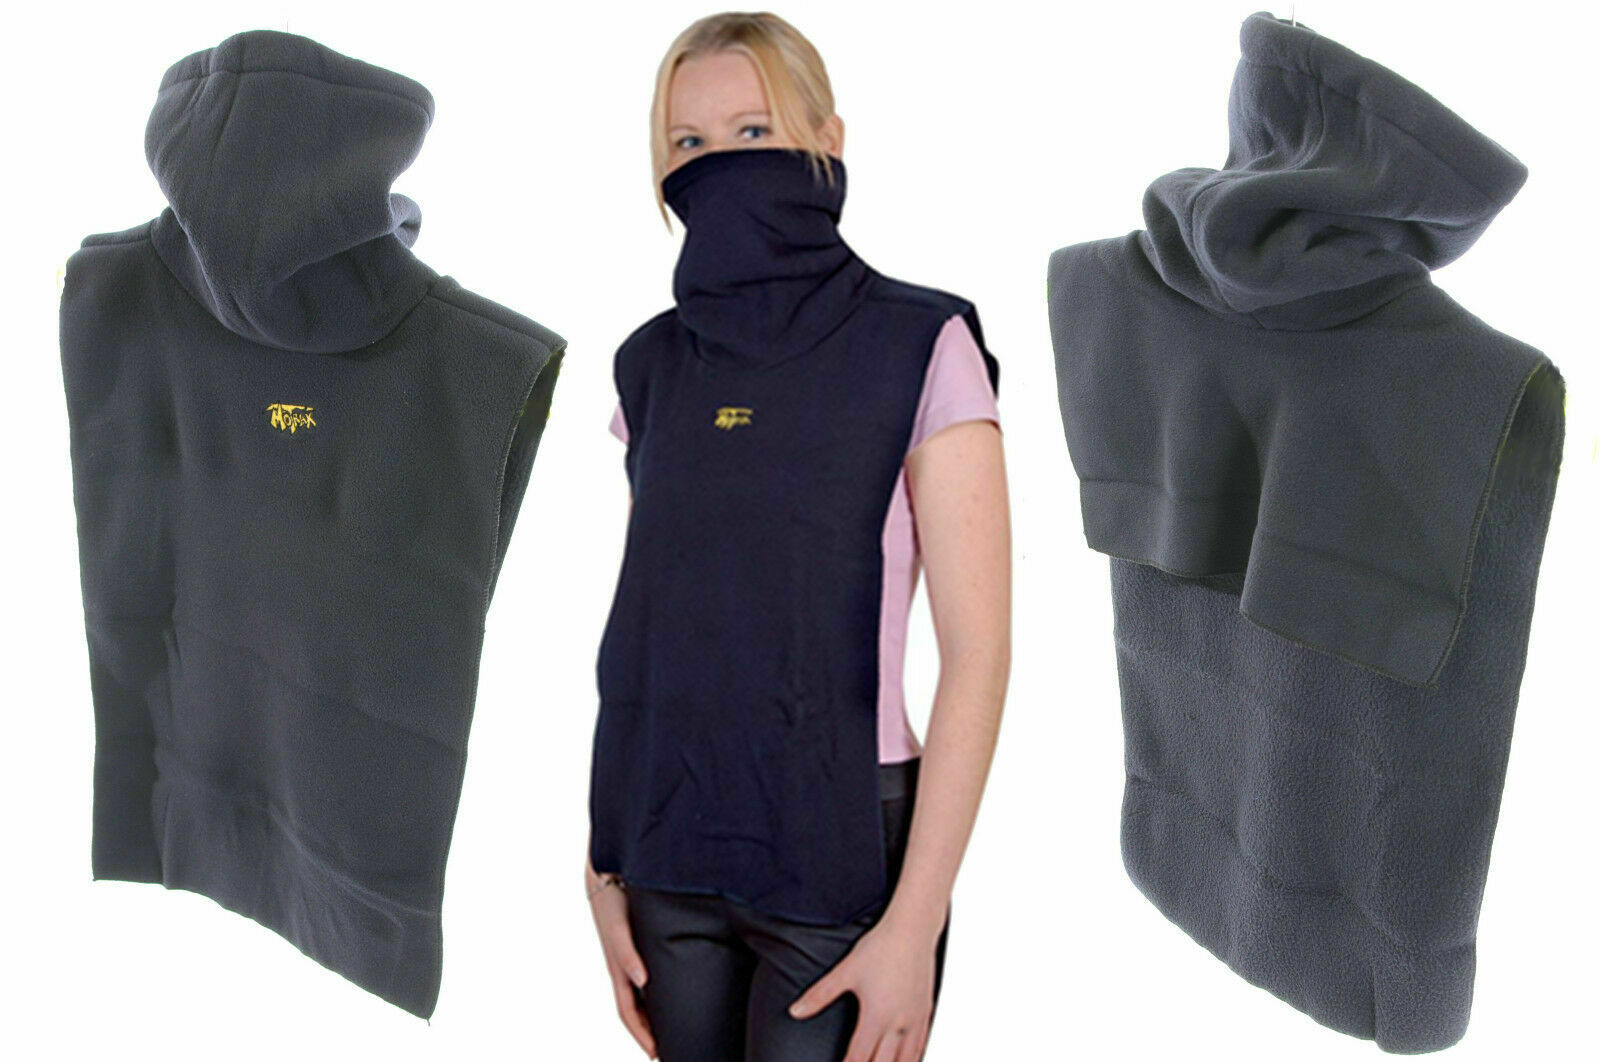 Thermal Insulated Fleece / Gilet With Integrated Neck Gaiter - Medium Size - Sportandleisure.com (6968143151258)